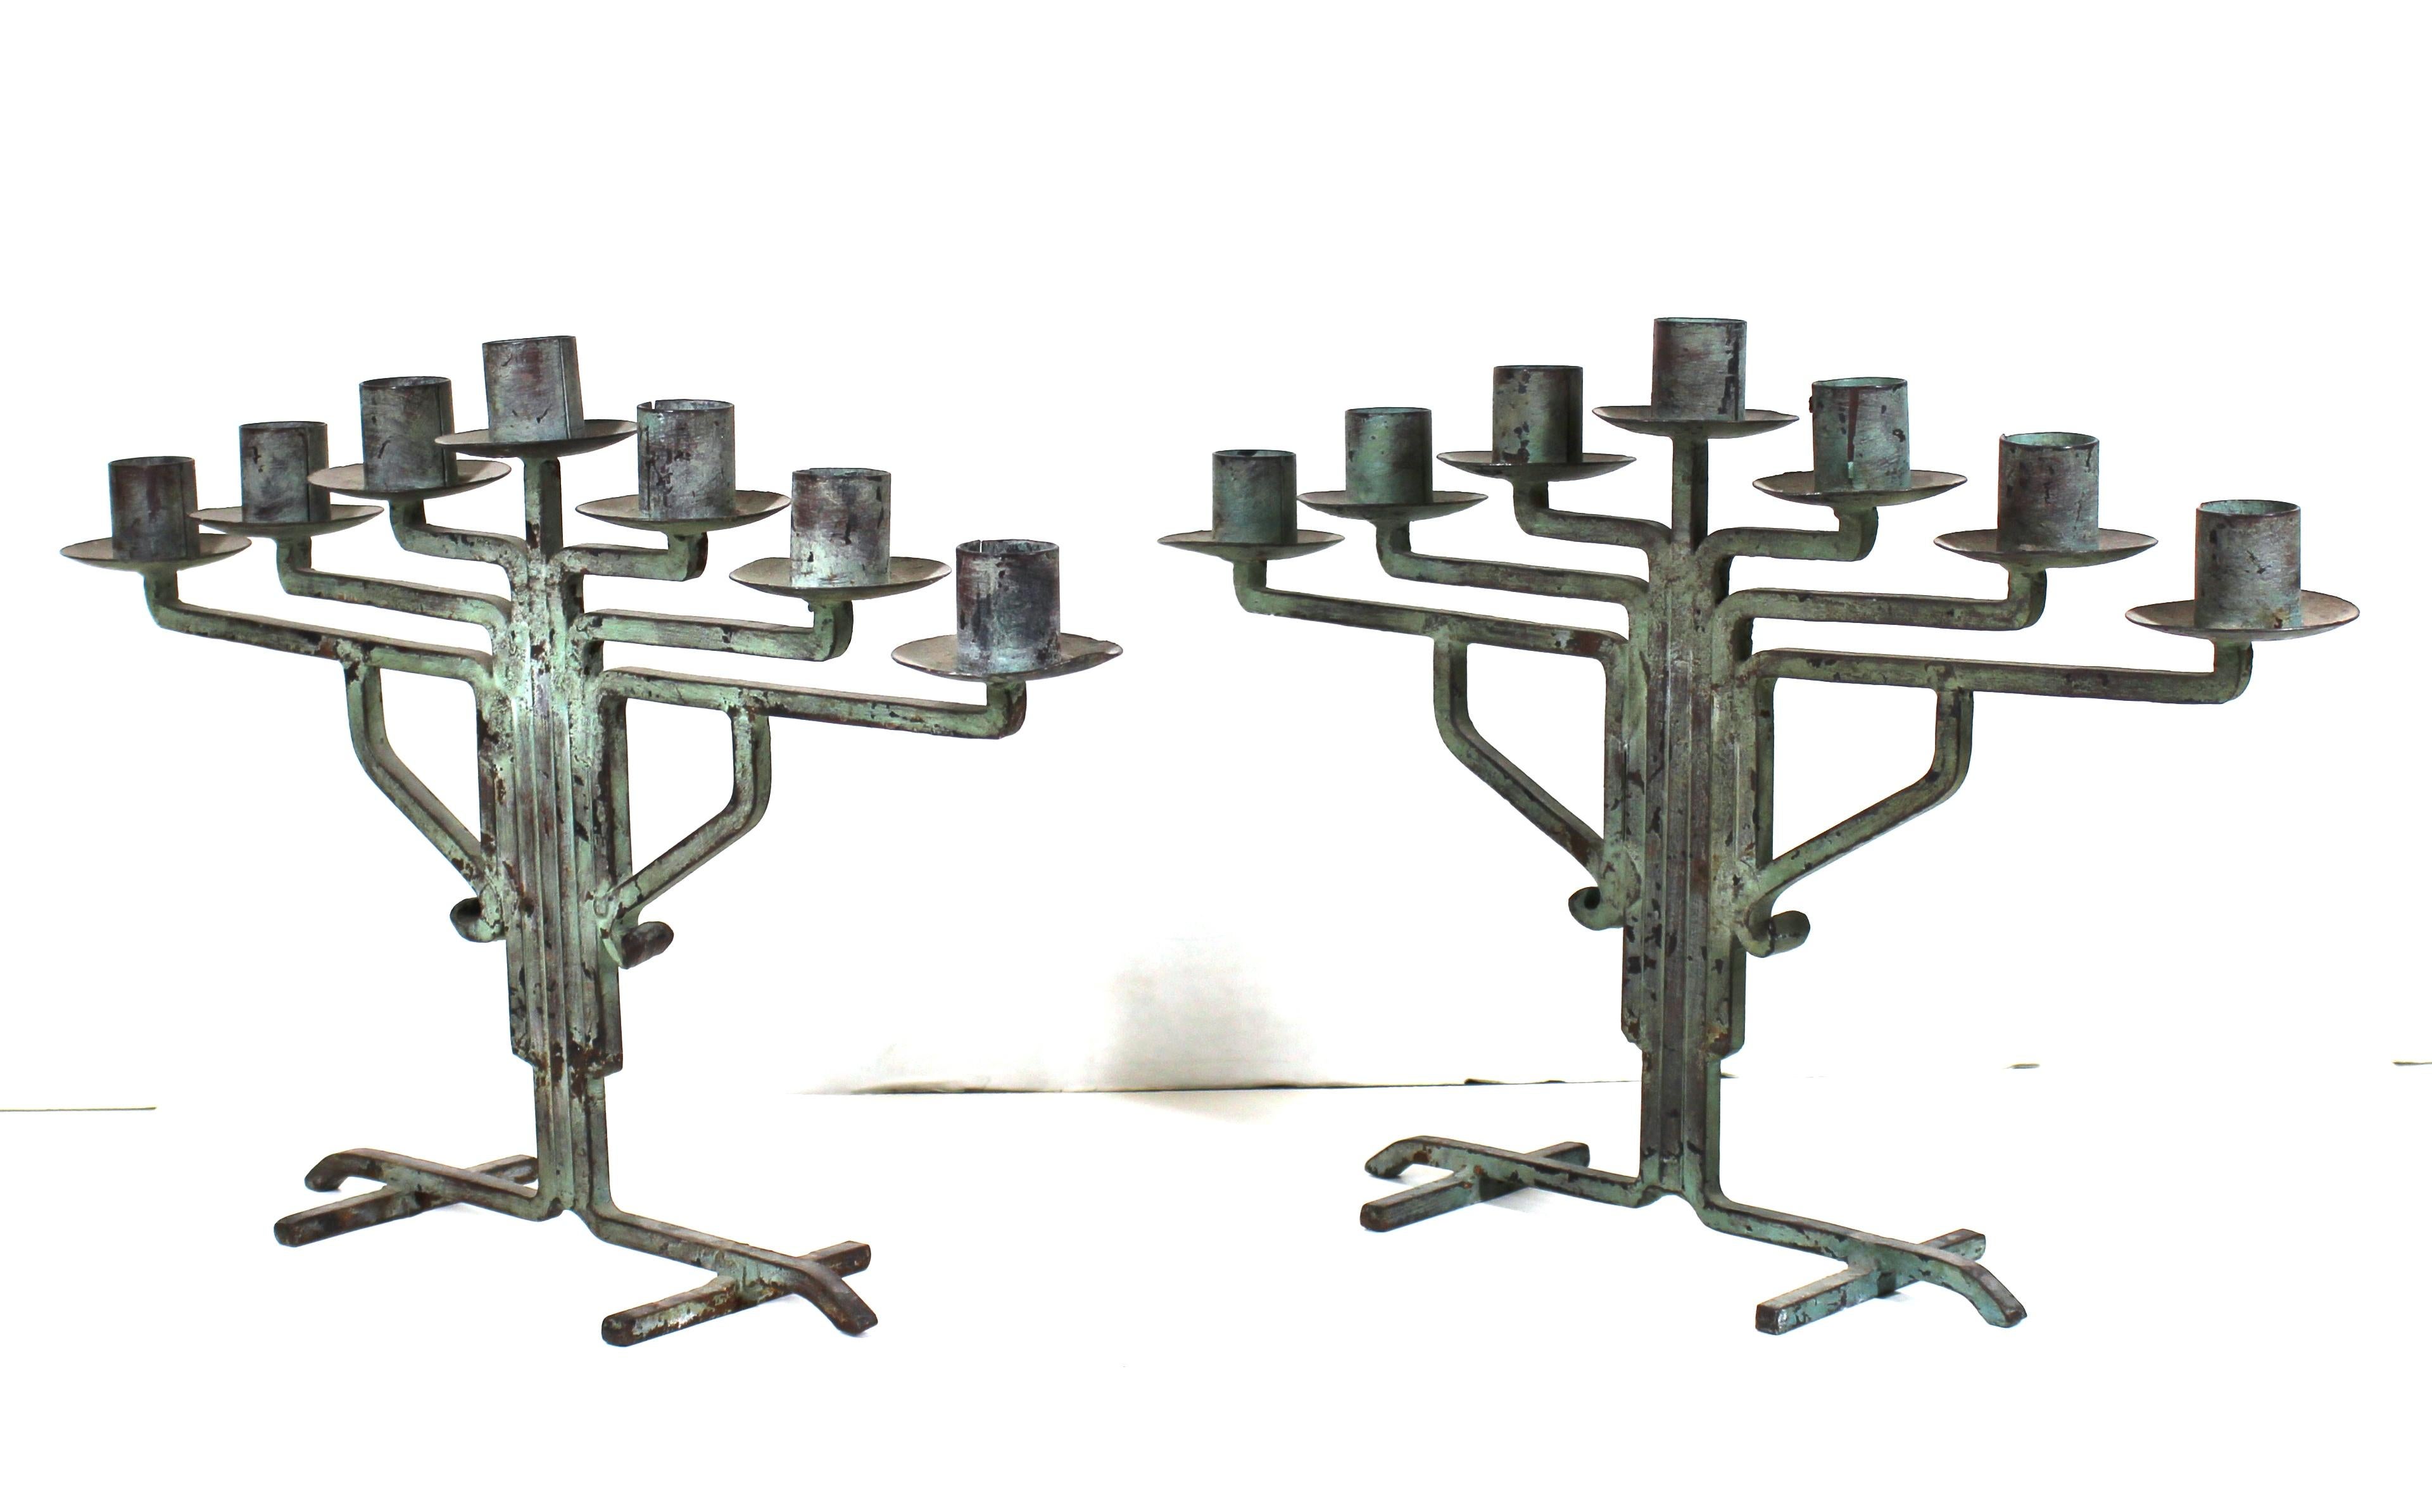 American modernist pair of candelabra with green patina, designed in the pioneering Prairie School style that was developing in the U.S. during the early 20th century. The pair is made of wrought iron and bronze and was likely manufactured in the